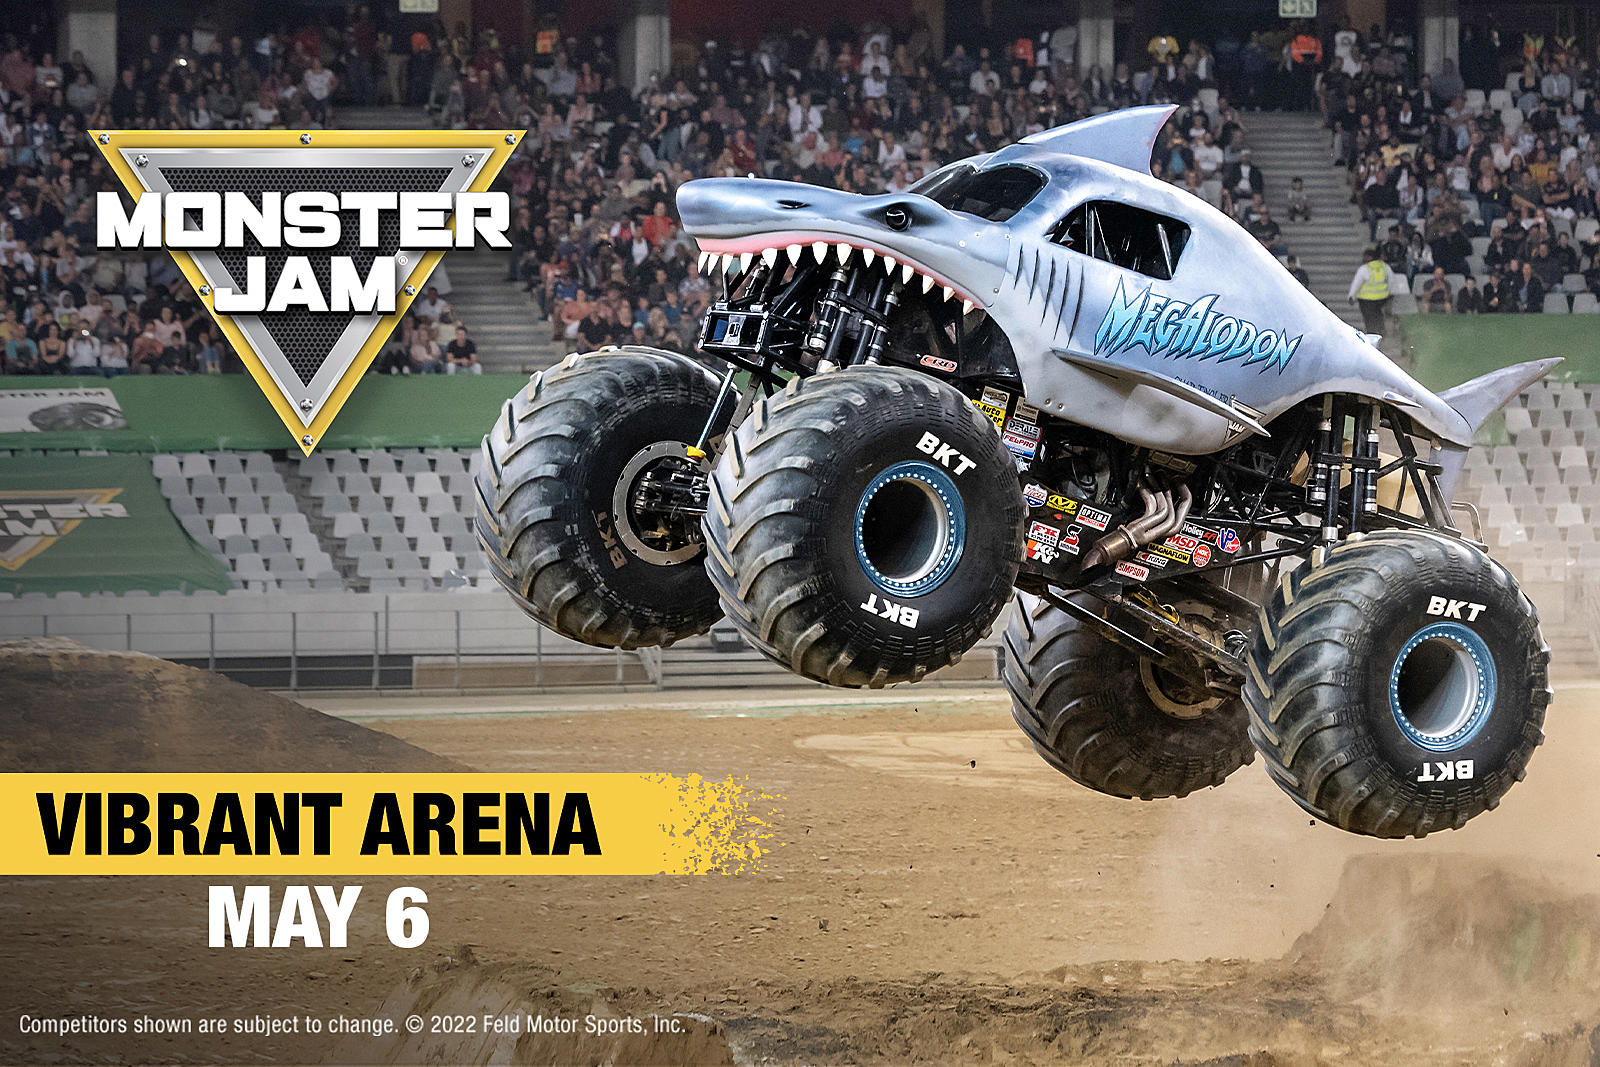 Wilson County-Tennessee State Fair bringing monster truck show